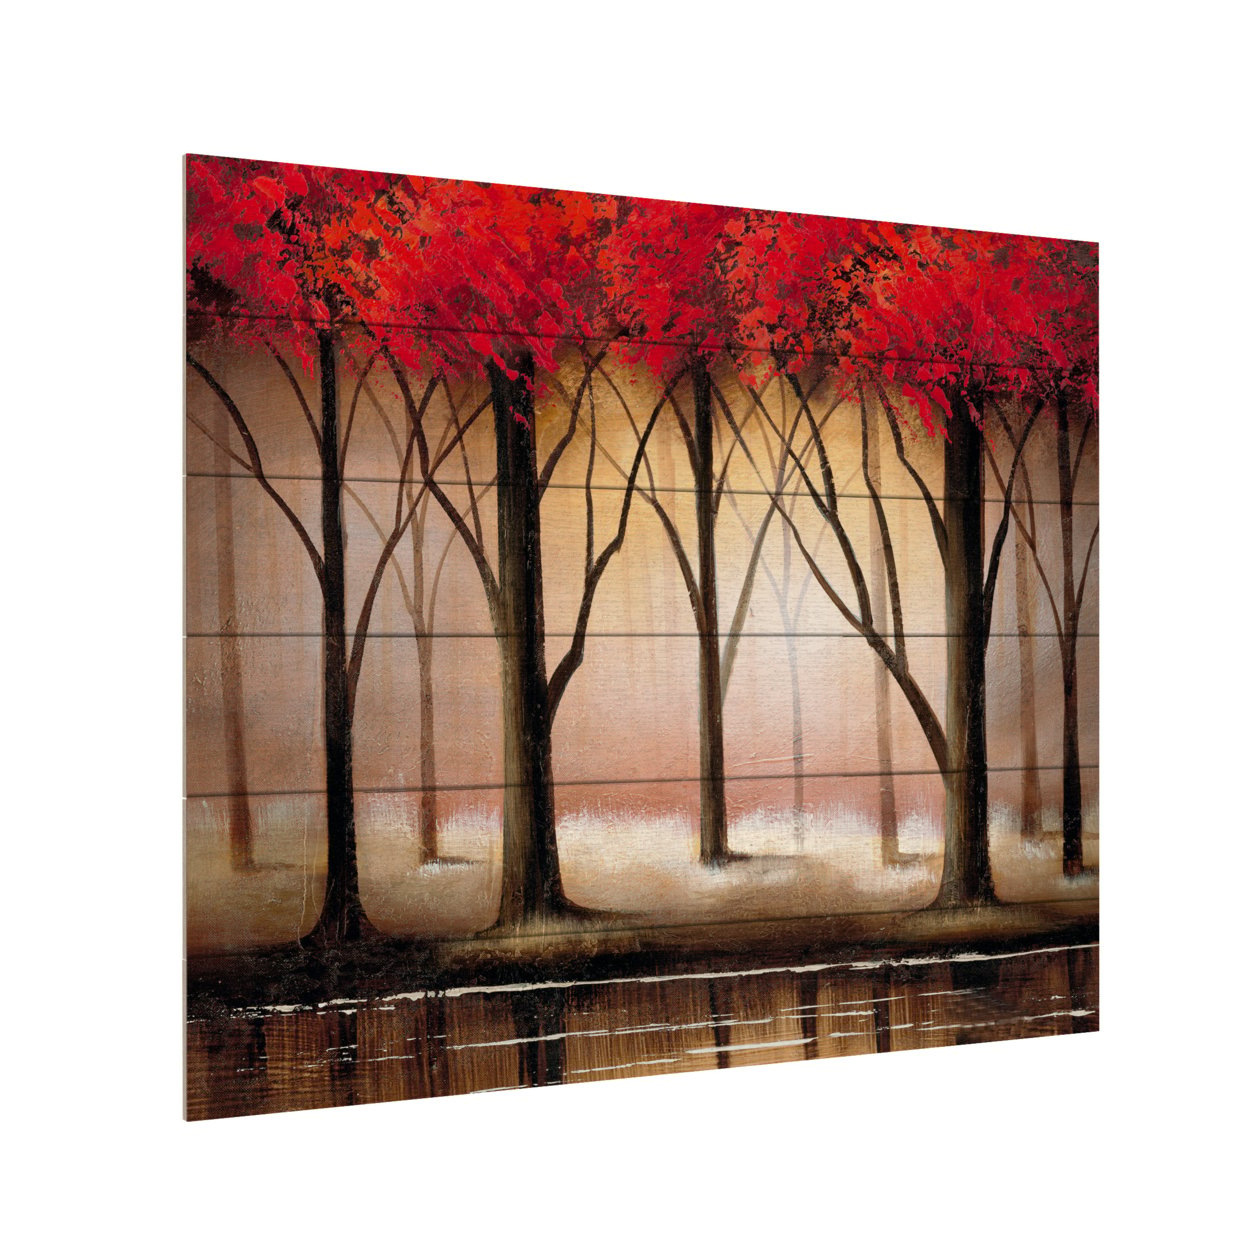 Wooden Slat Art 18 X 22 Inches Titled Serenade In Red Ready To Hang Home Decor Picture